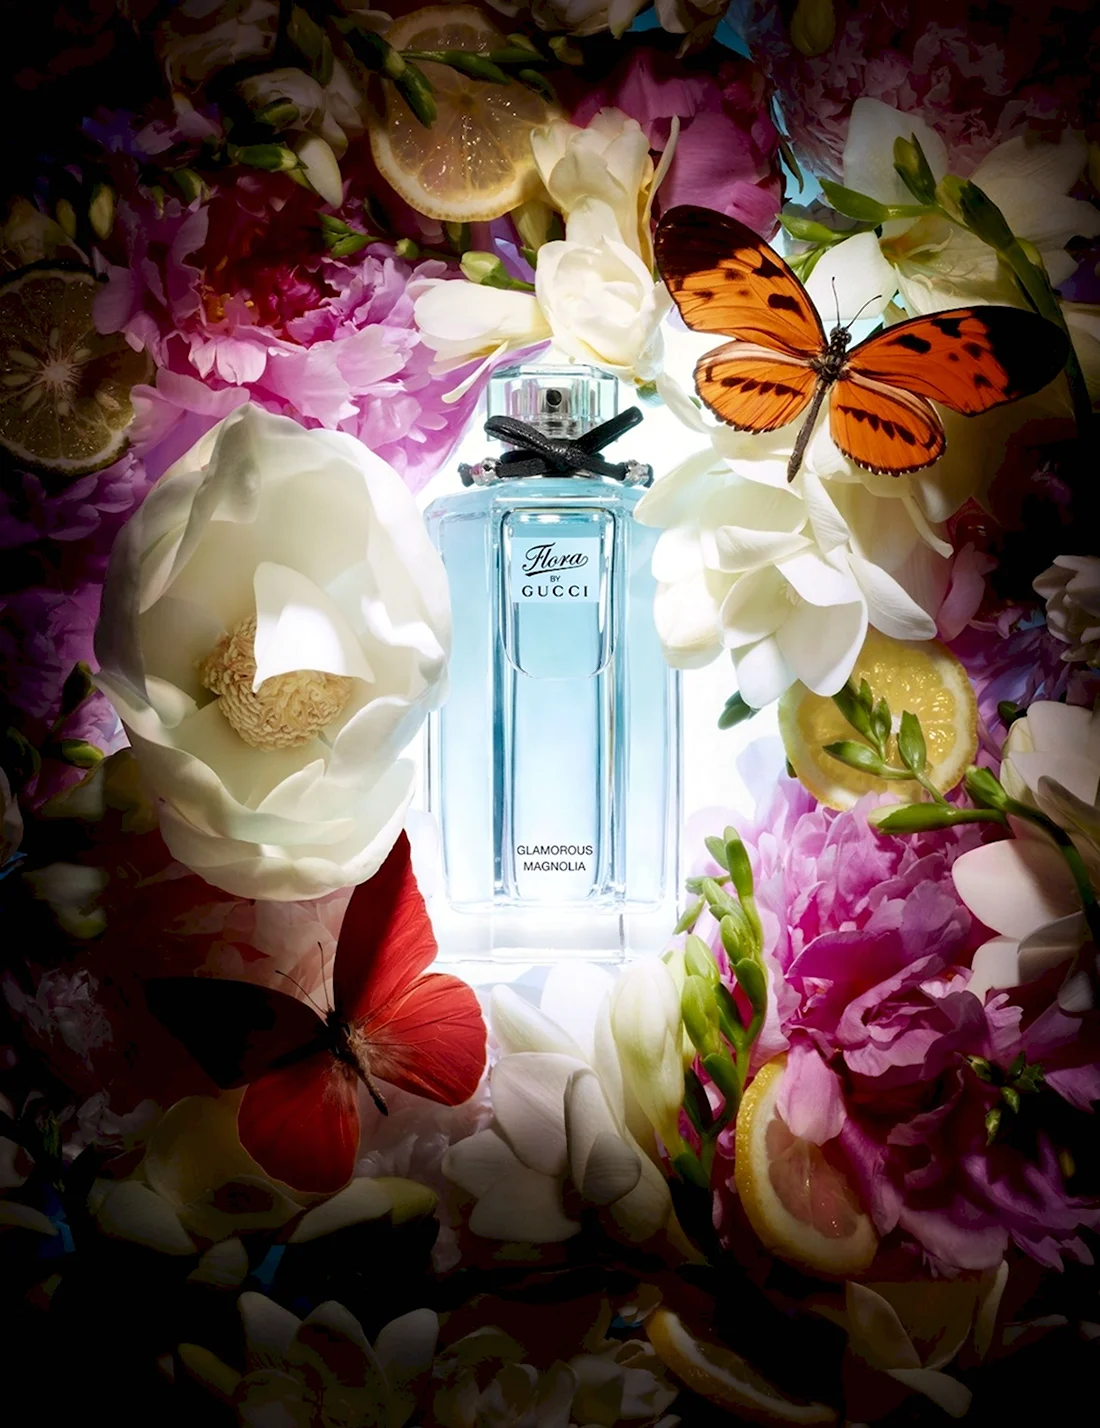 Flora by Gucci Glamorous Magnolia реклама